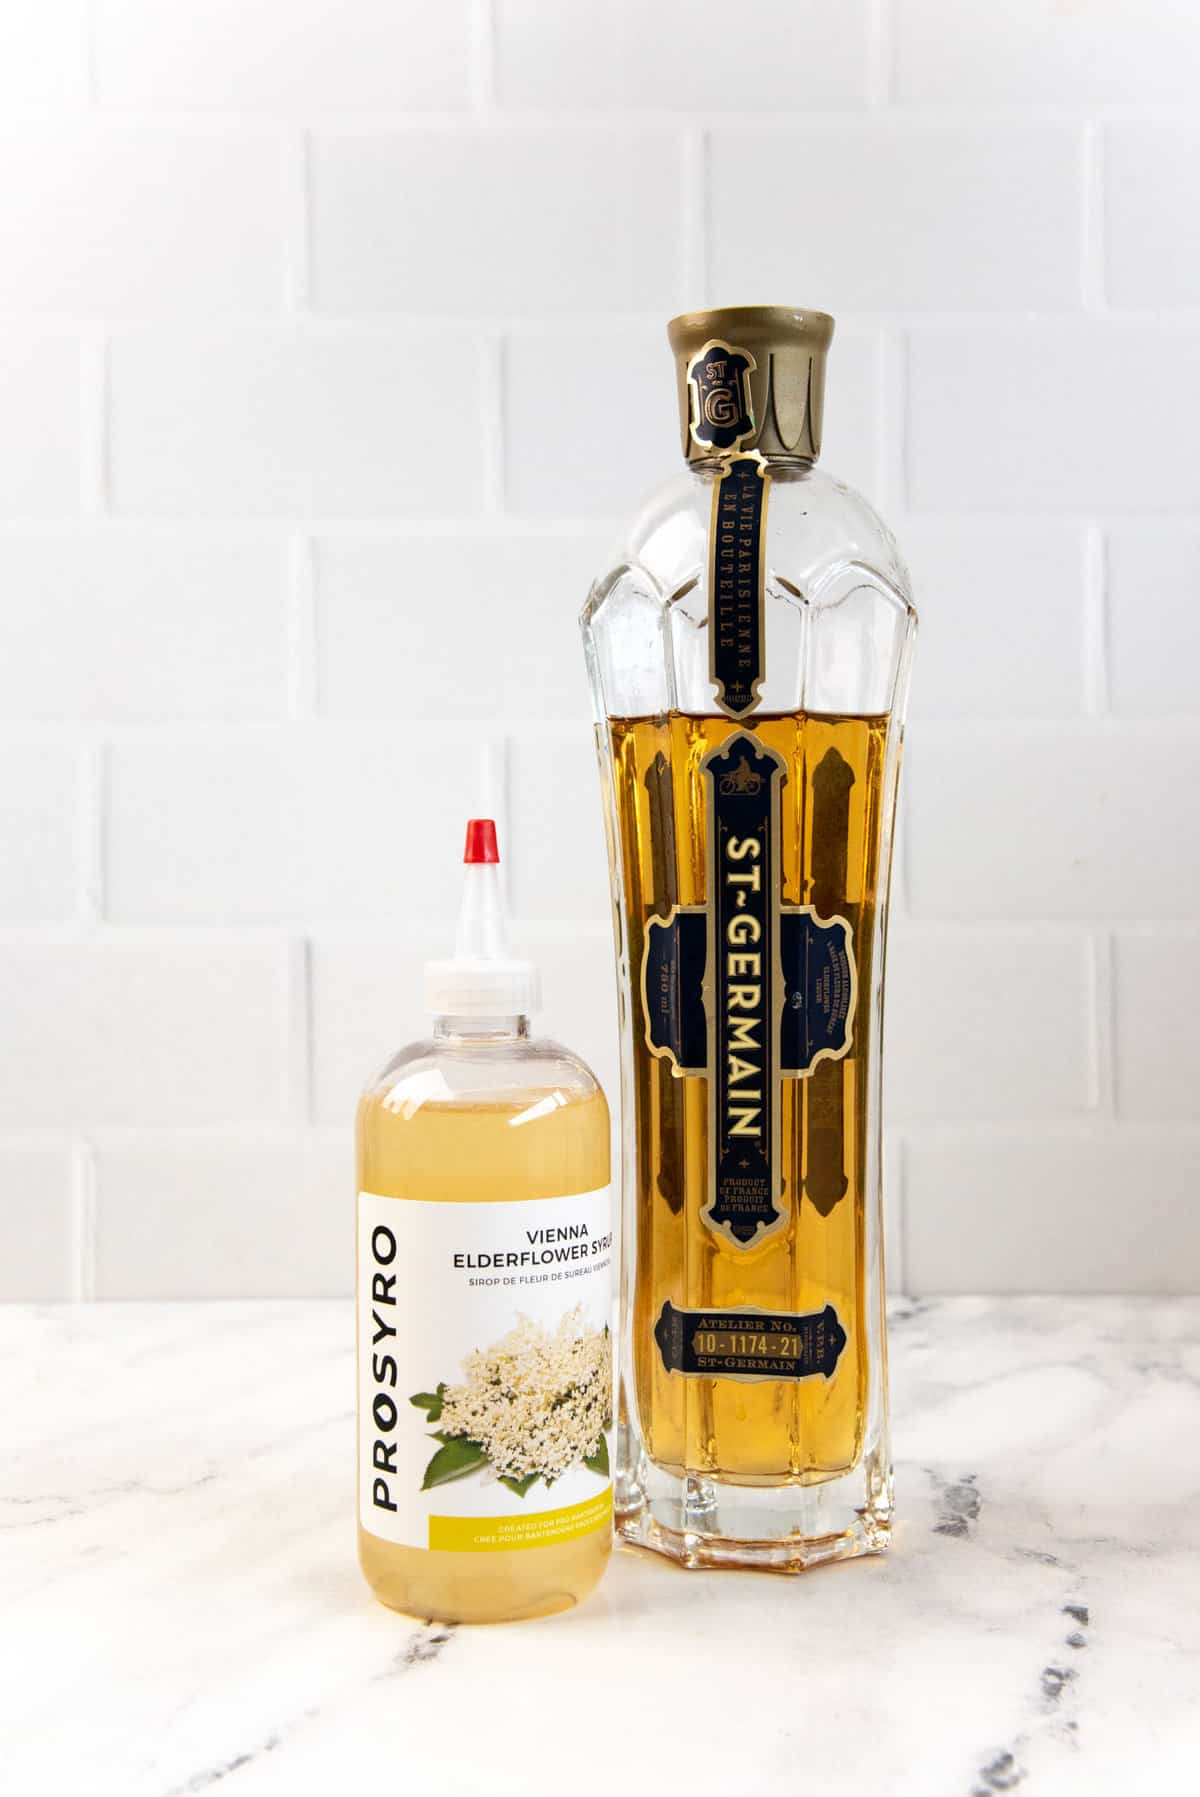 St Germain liqueur and an elderflower syrup bottle next to each other.